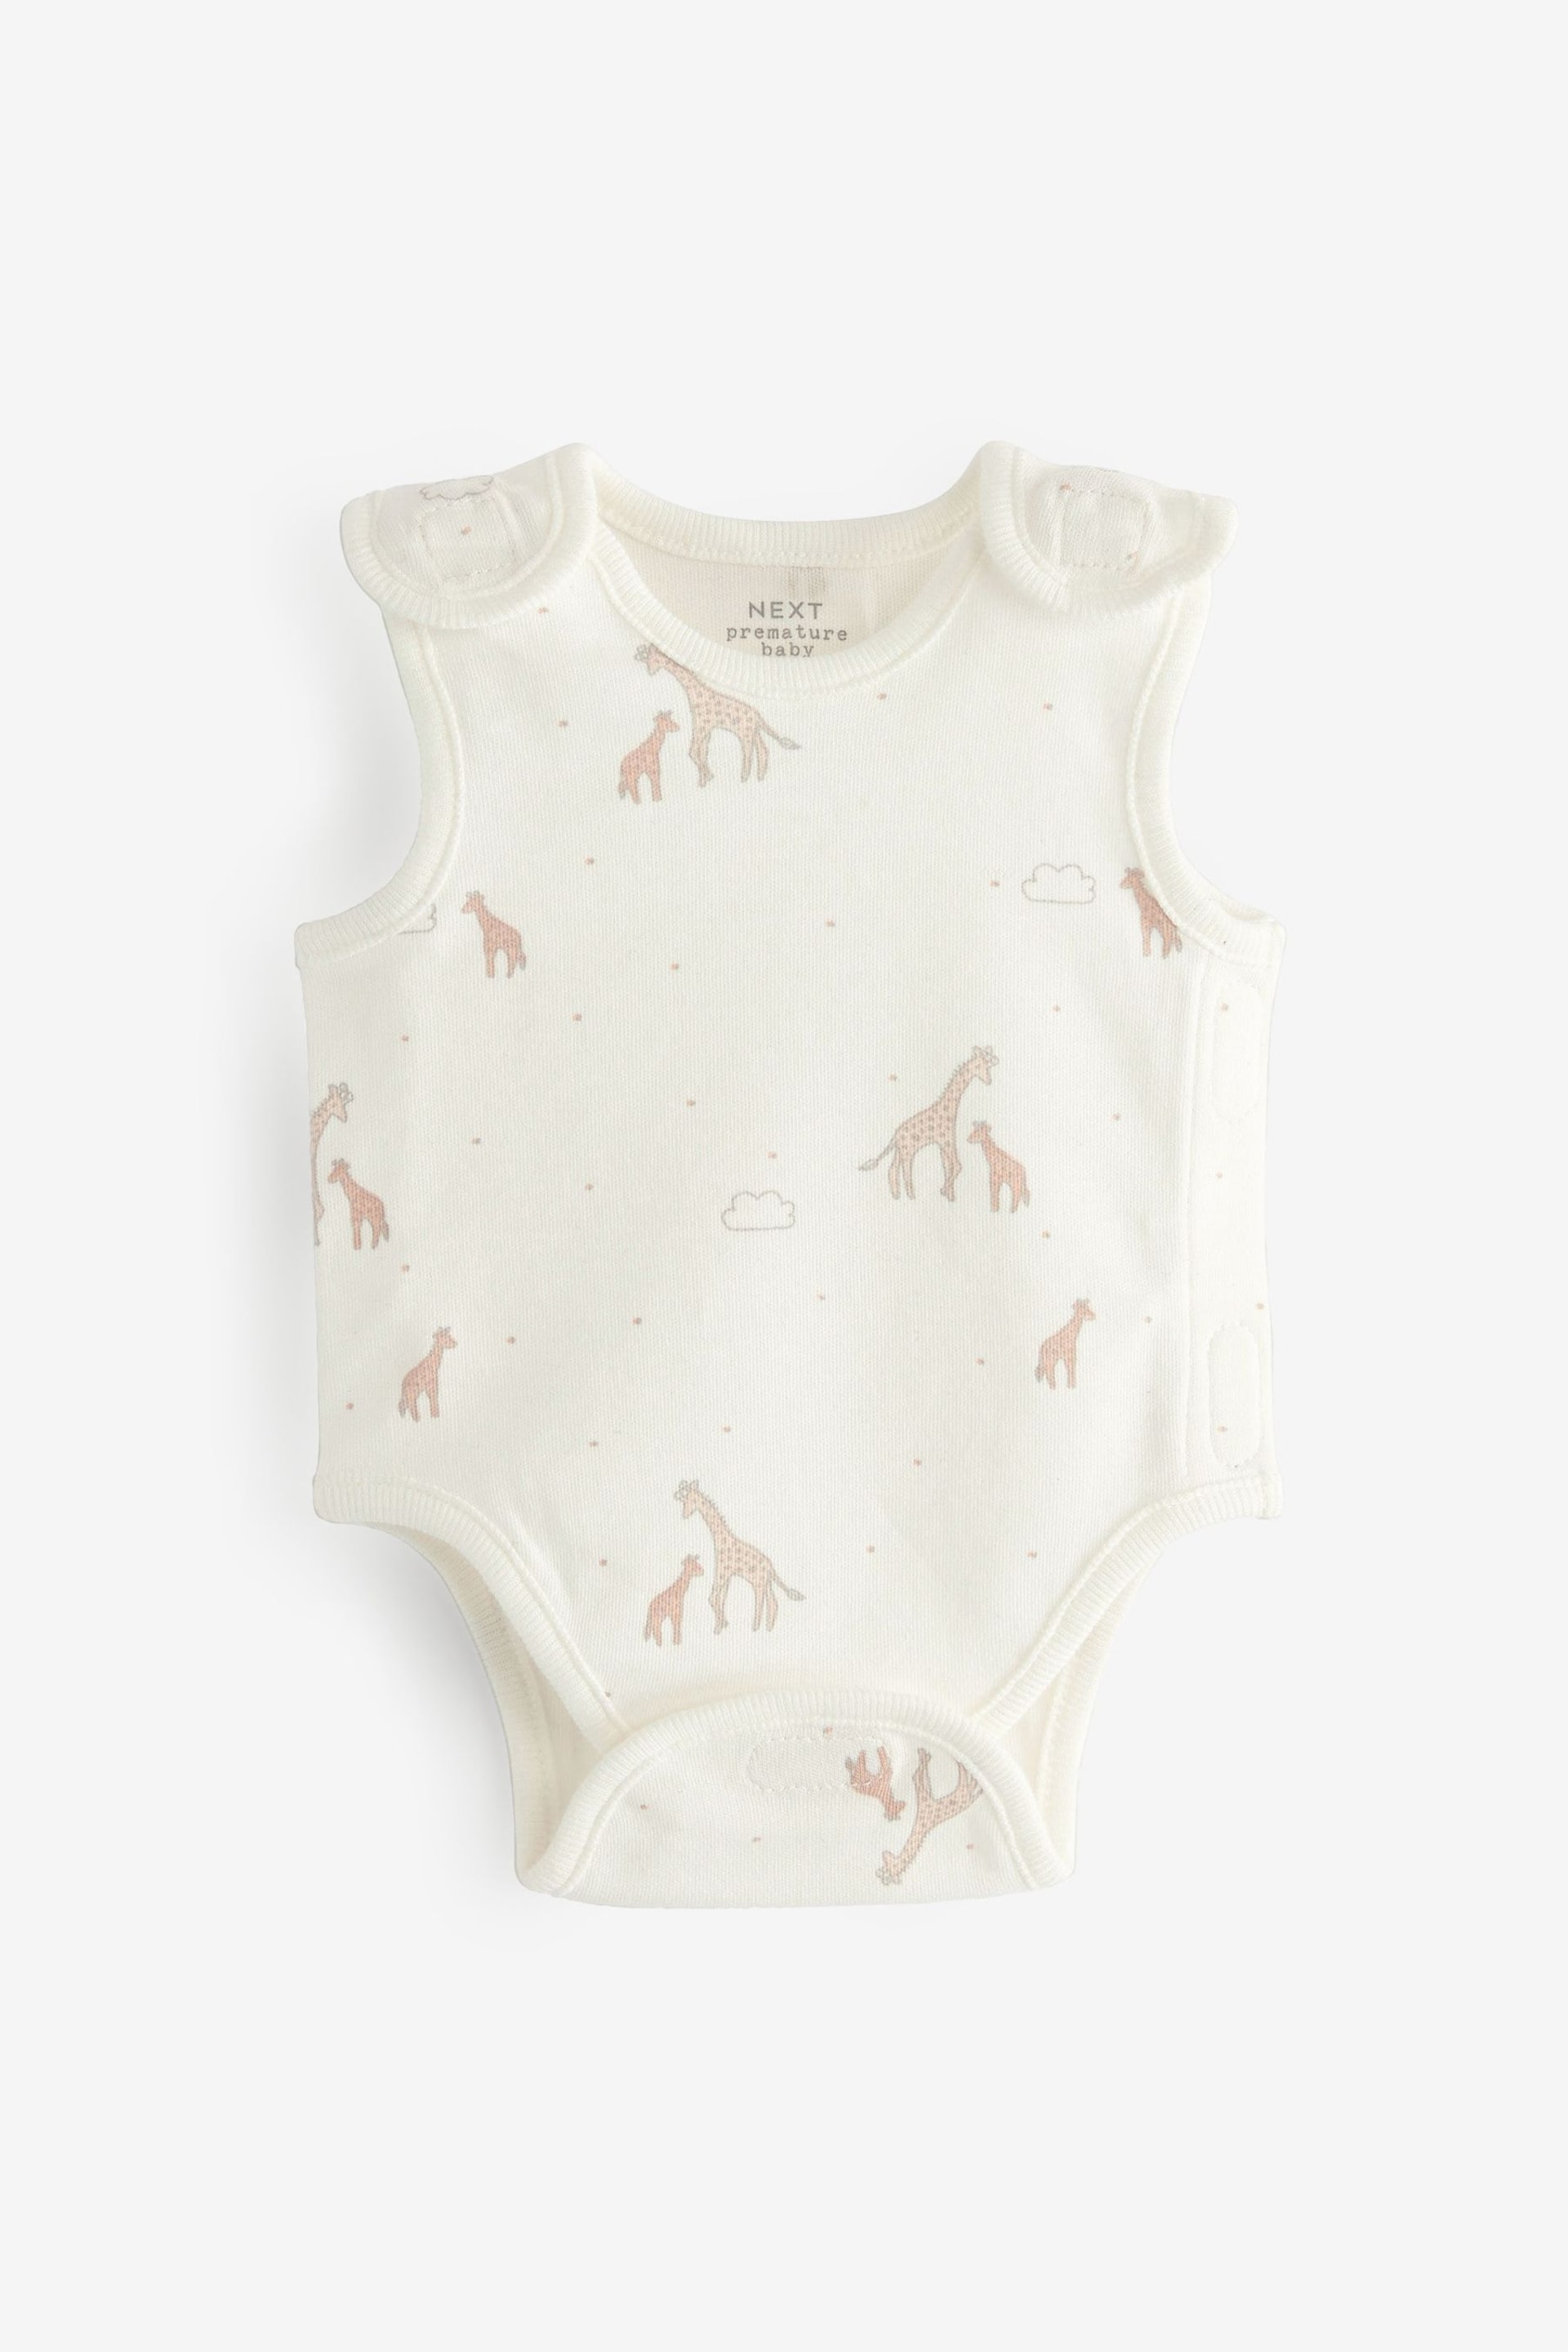 Neutral Character Premature Baby Bodysuits 3 Pack - Image 2 of 6